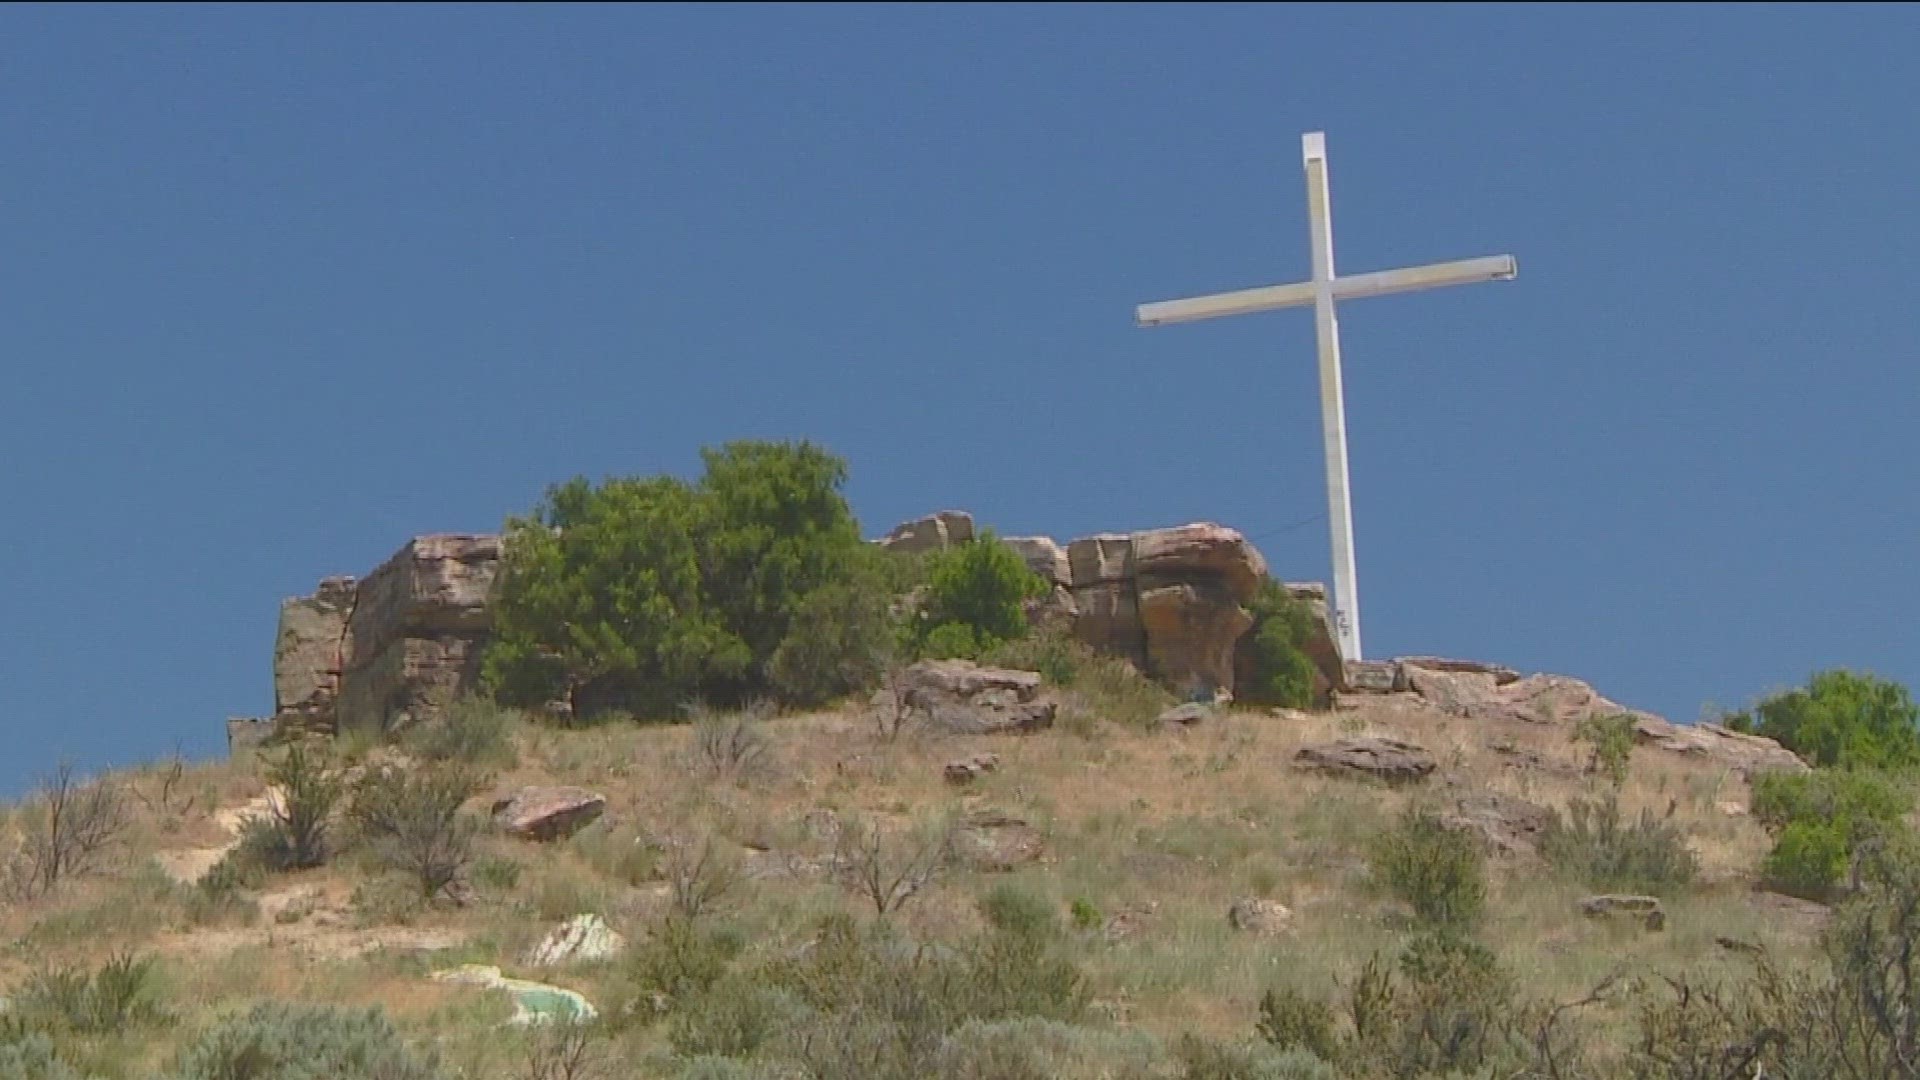 According to Preservation Idaho, the idea for the cross came from an episode of “This is Your Life,” a show from the 1950s.